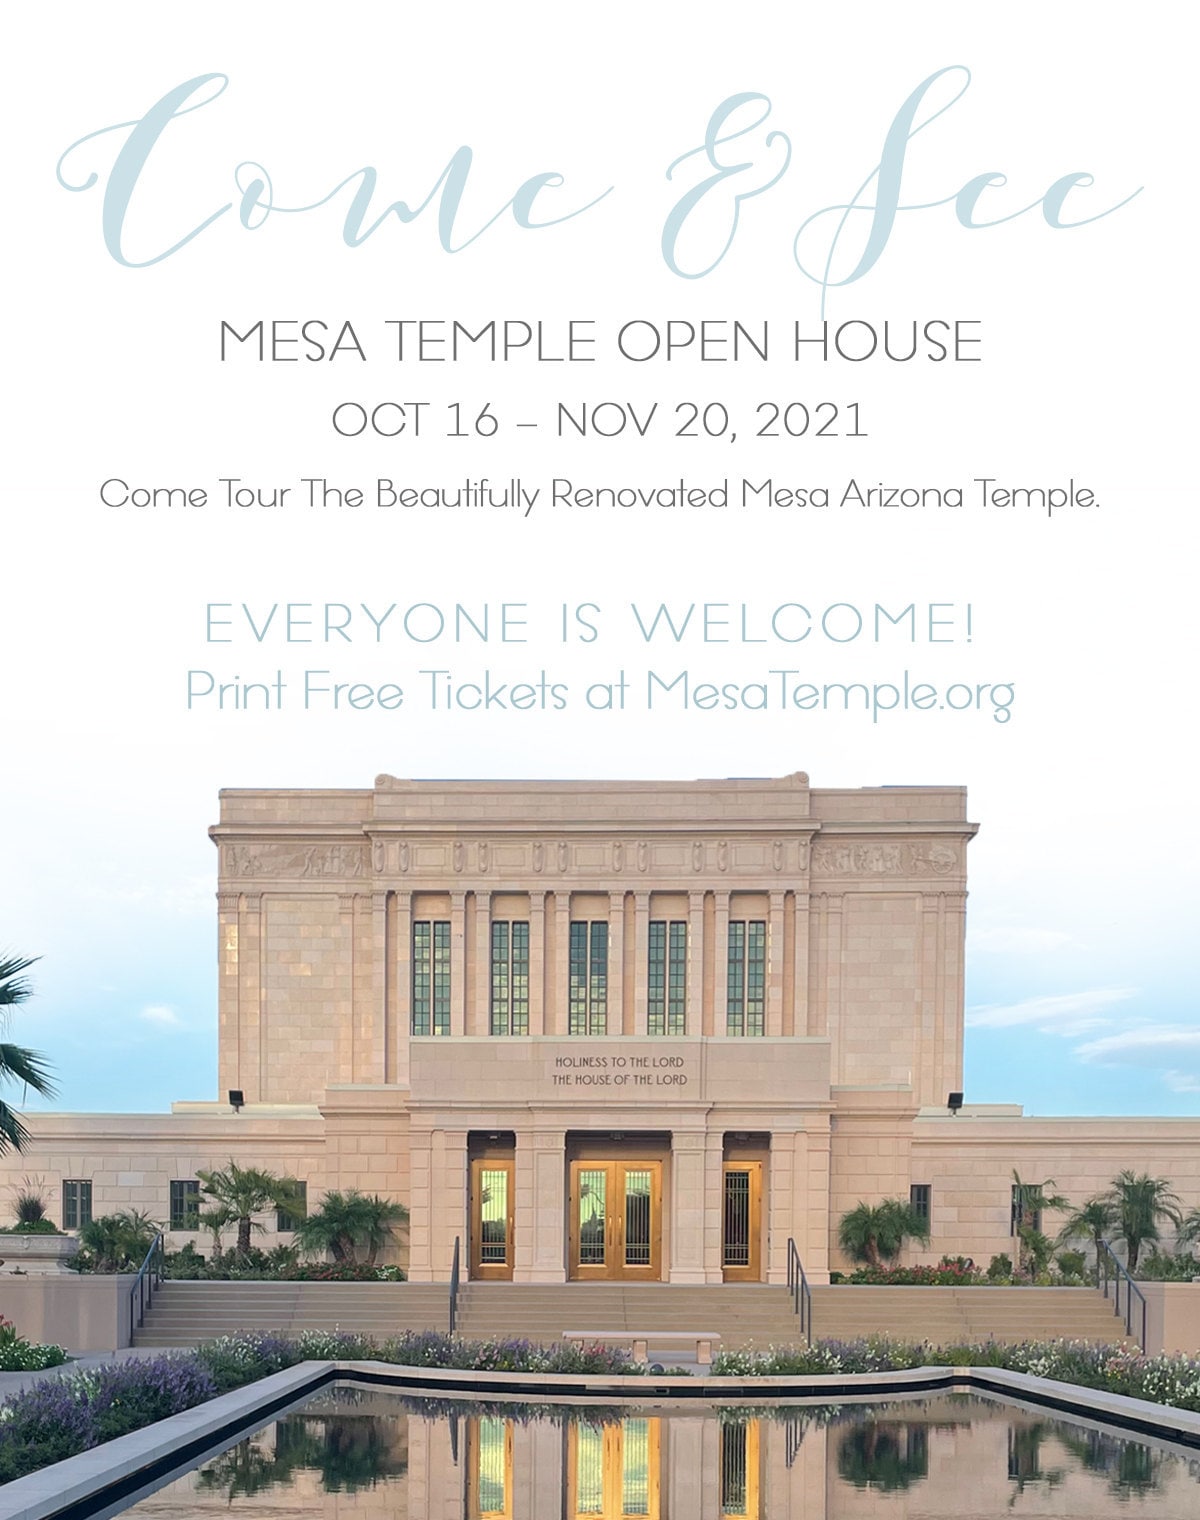 Mesa Temple Open House Tickets